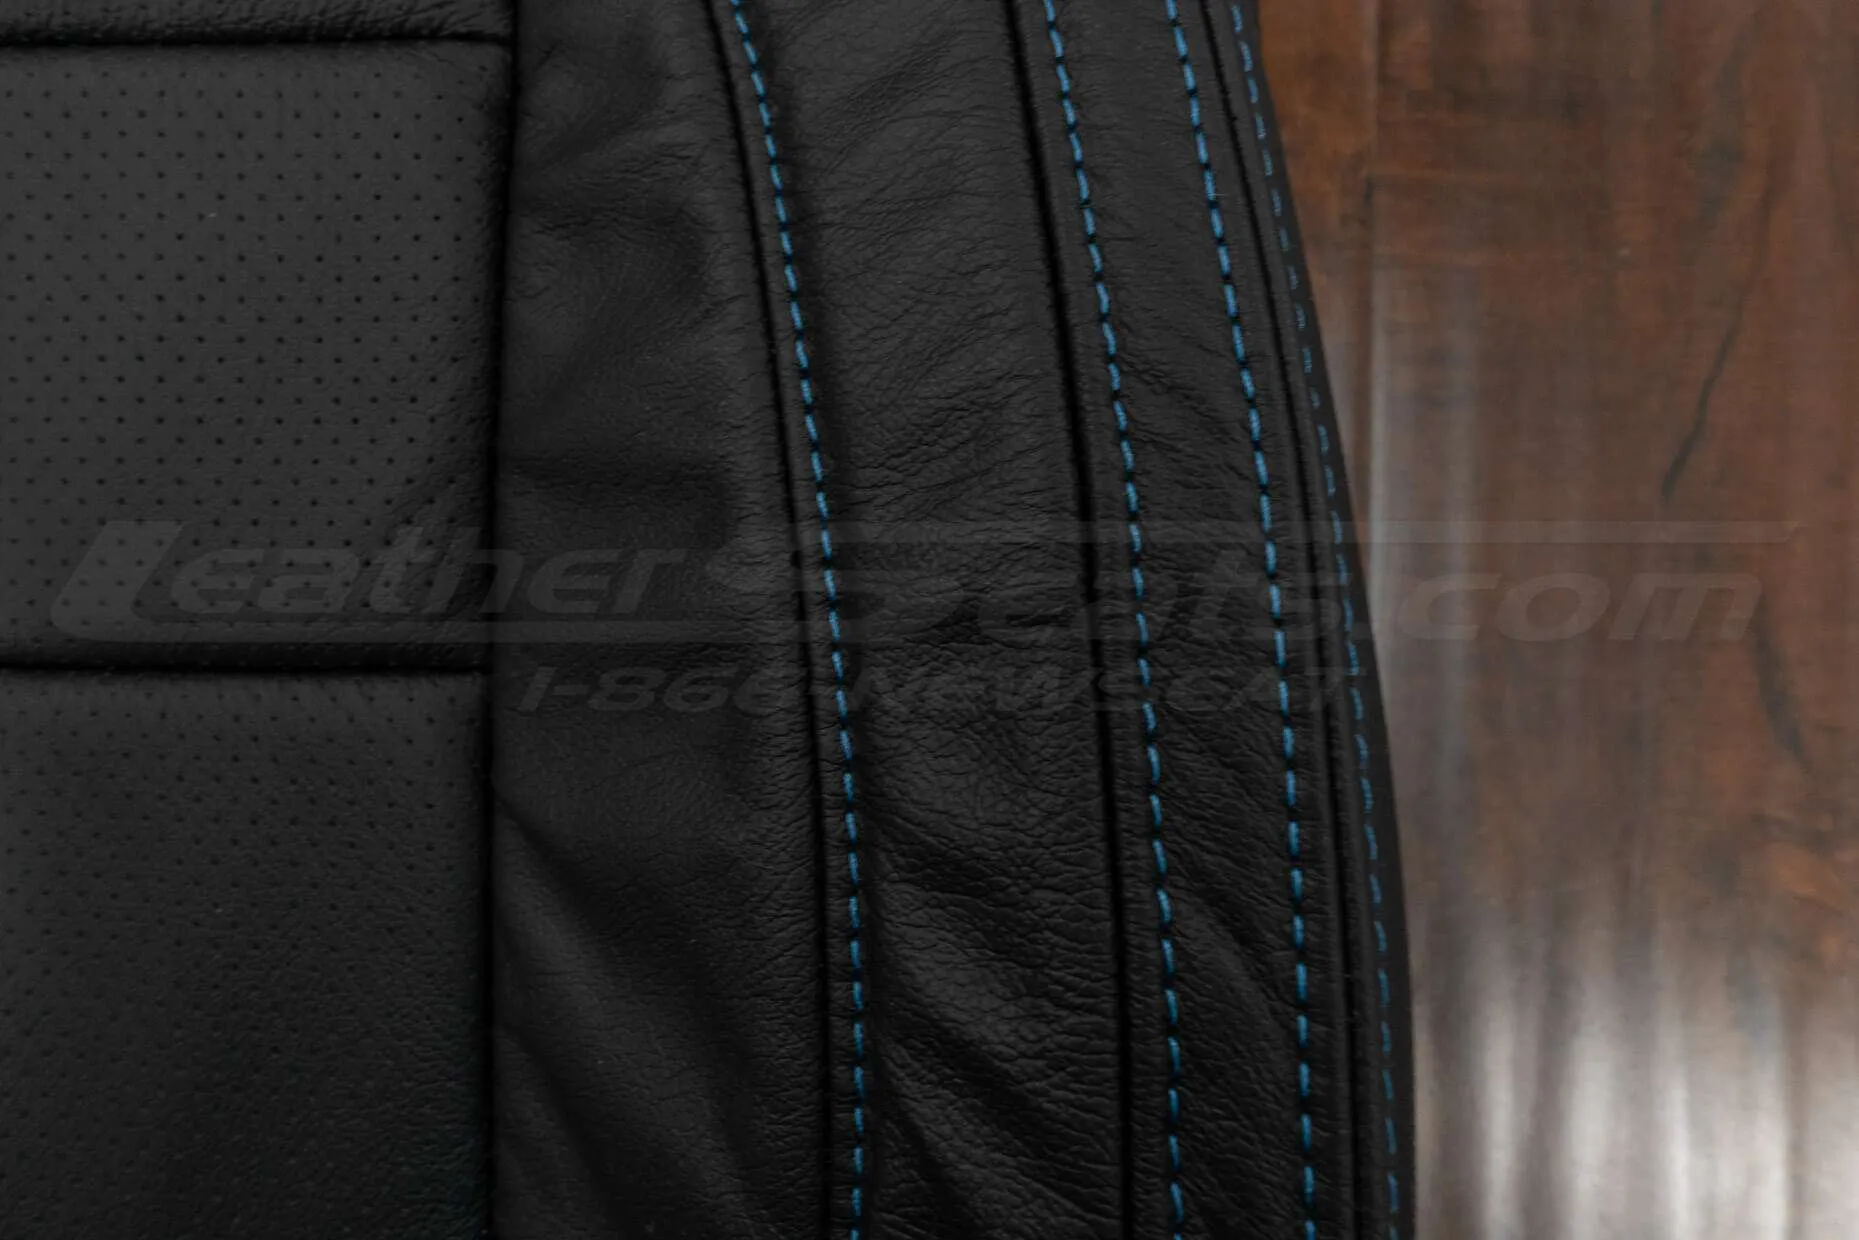 Pacific double-stitching on Black leather